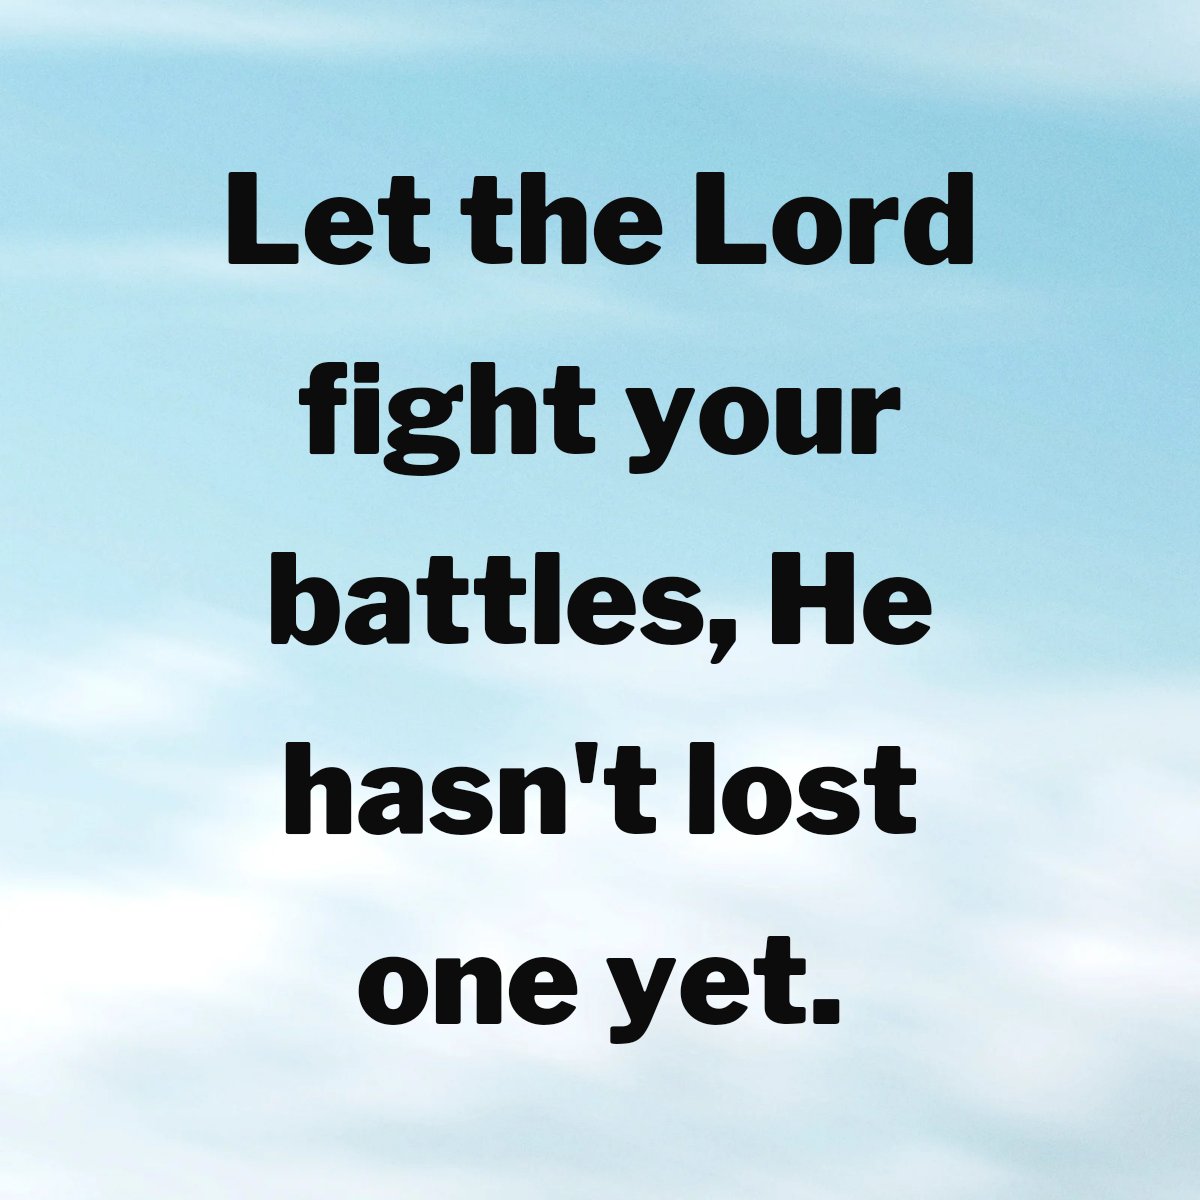 Amen, and God will always emerge victorious in every battle.

#LetGod #WayMaker #AllThingsWorkTogether #GodIsInControl #Blessed